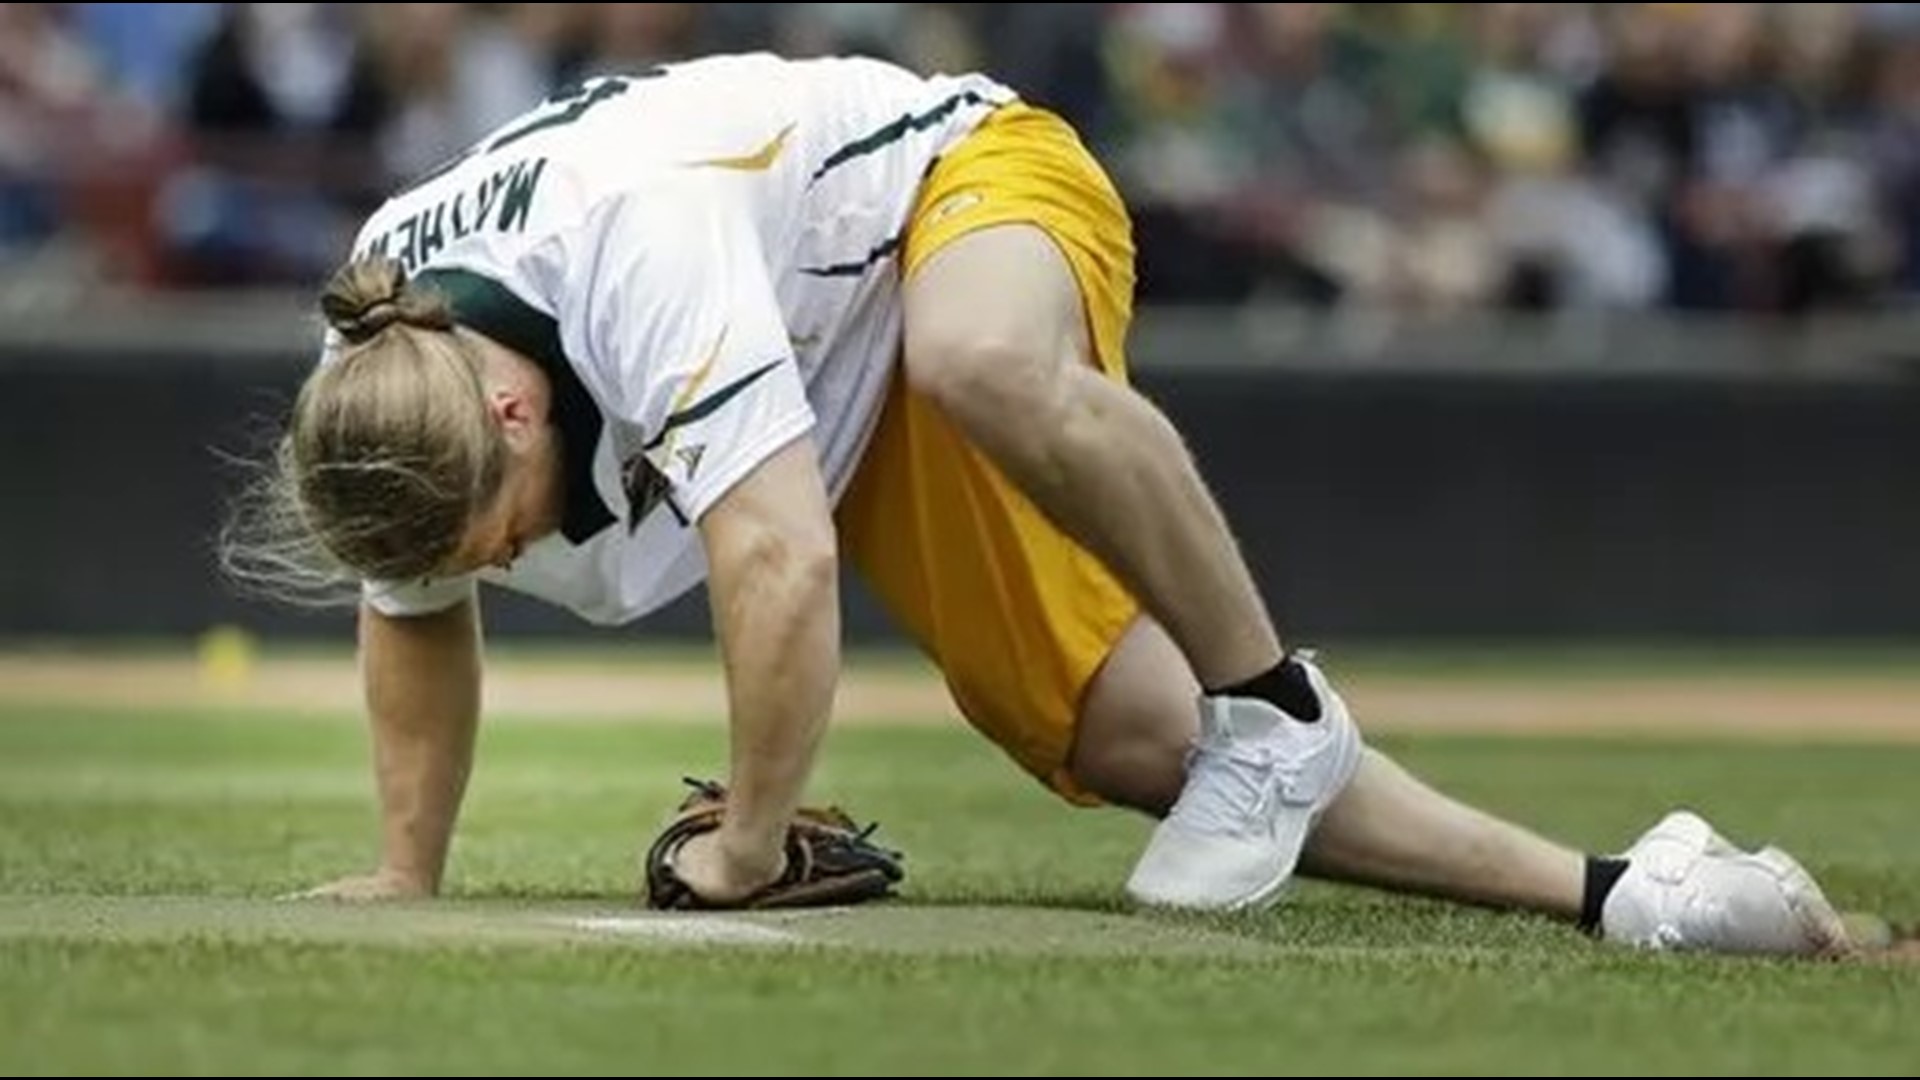 Packers' Clay Matthews hit in face by line drive during softball game